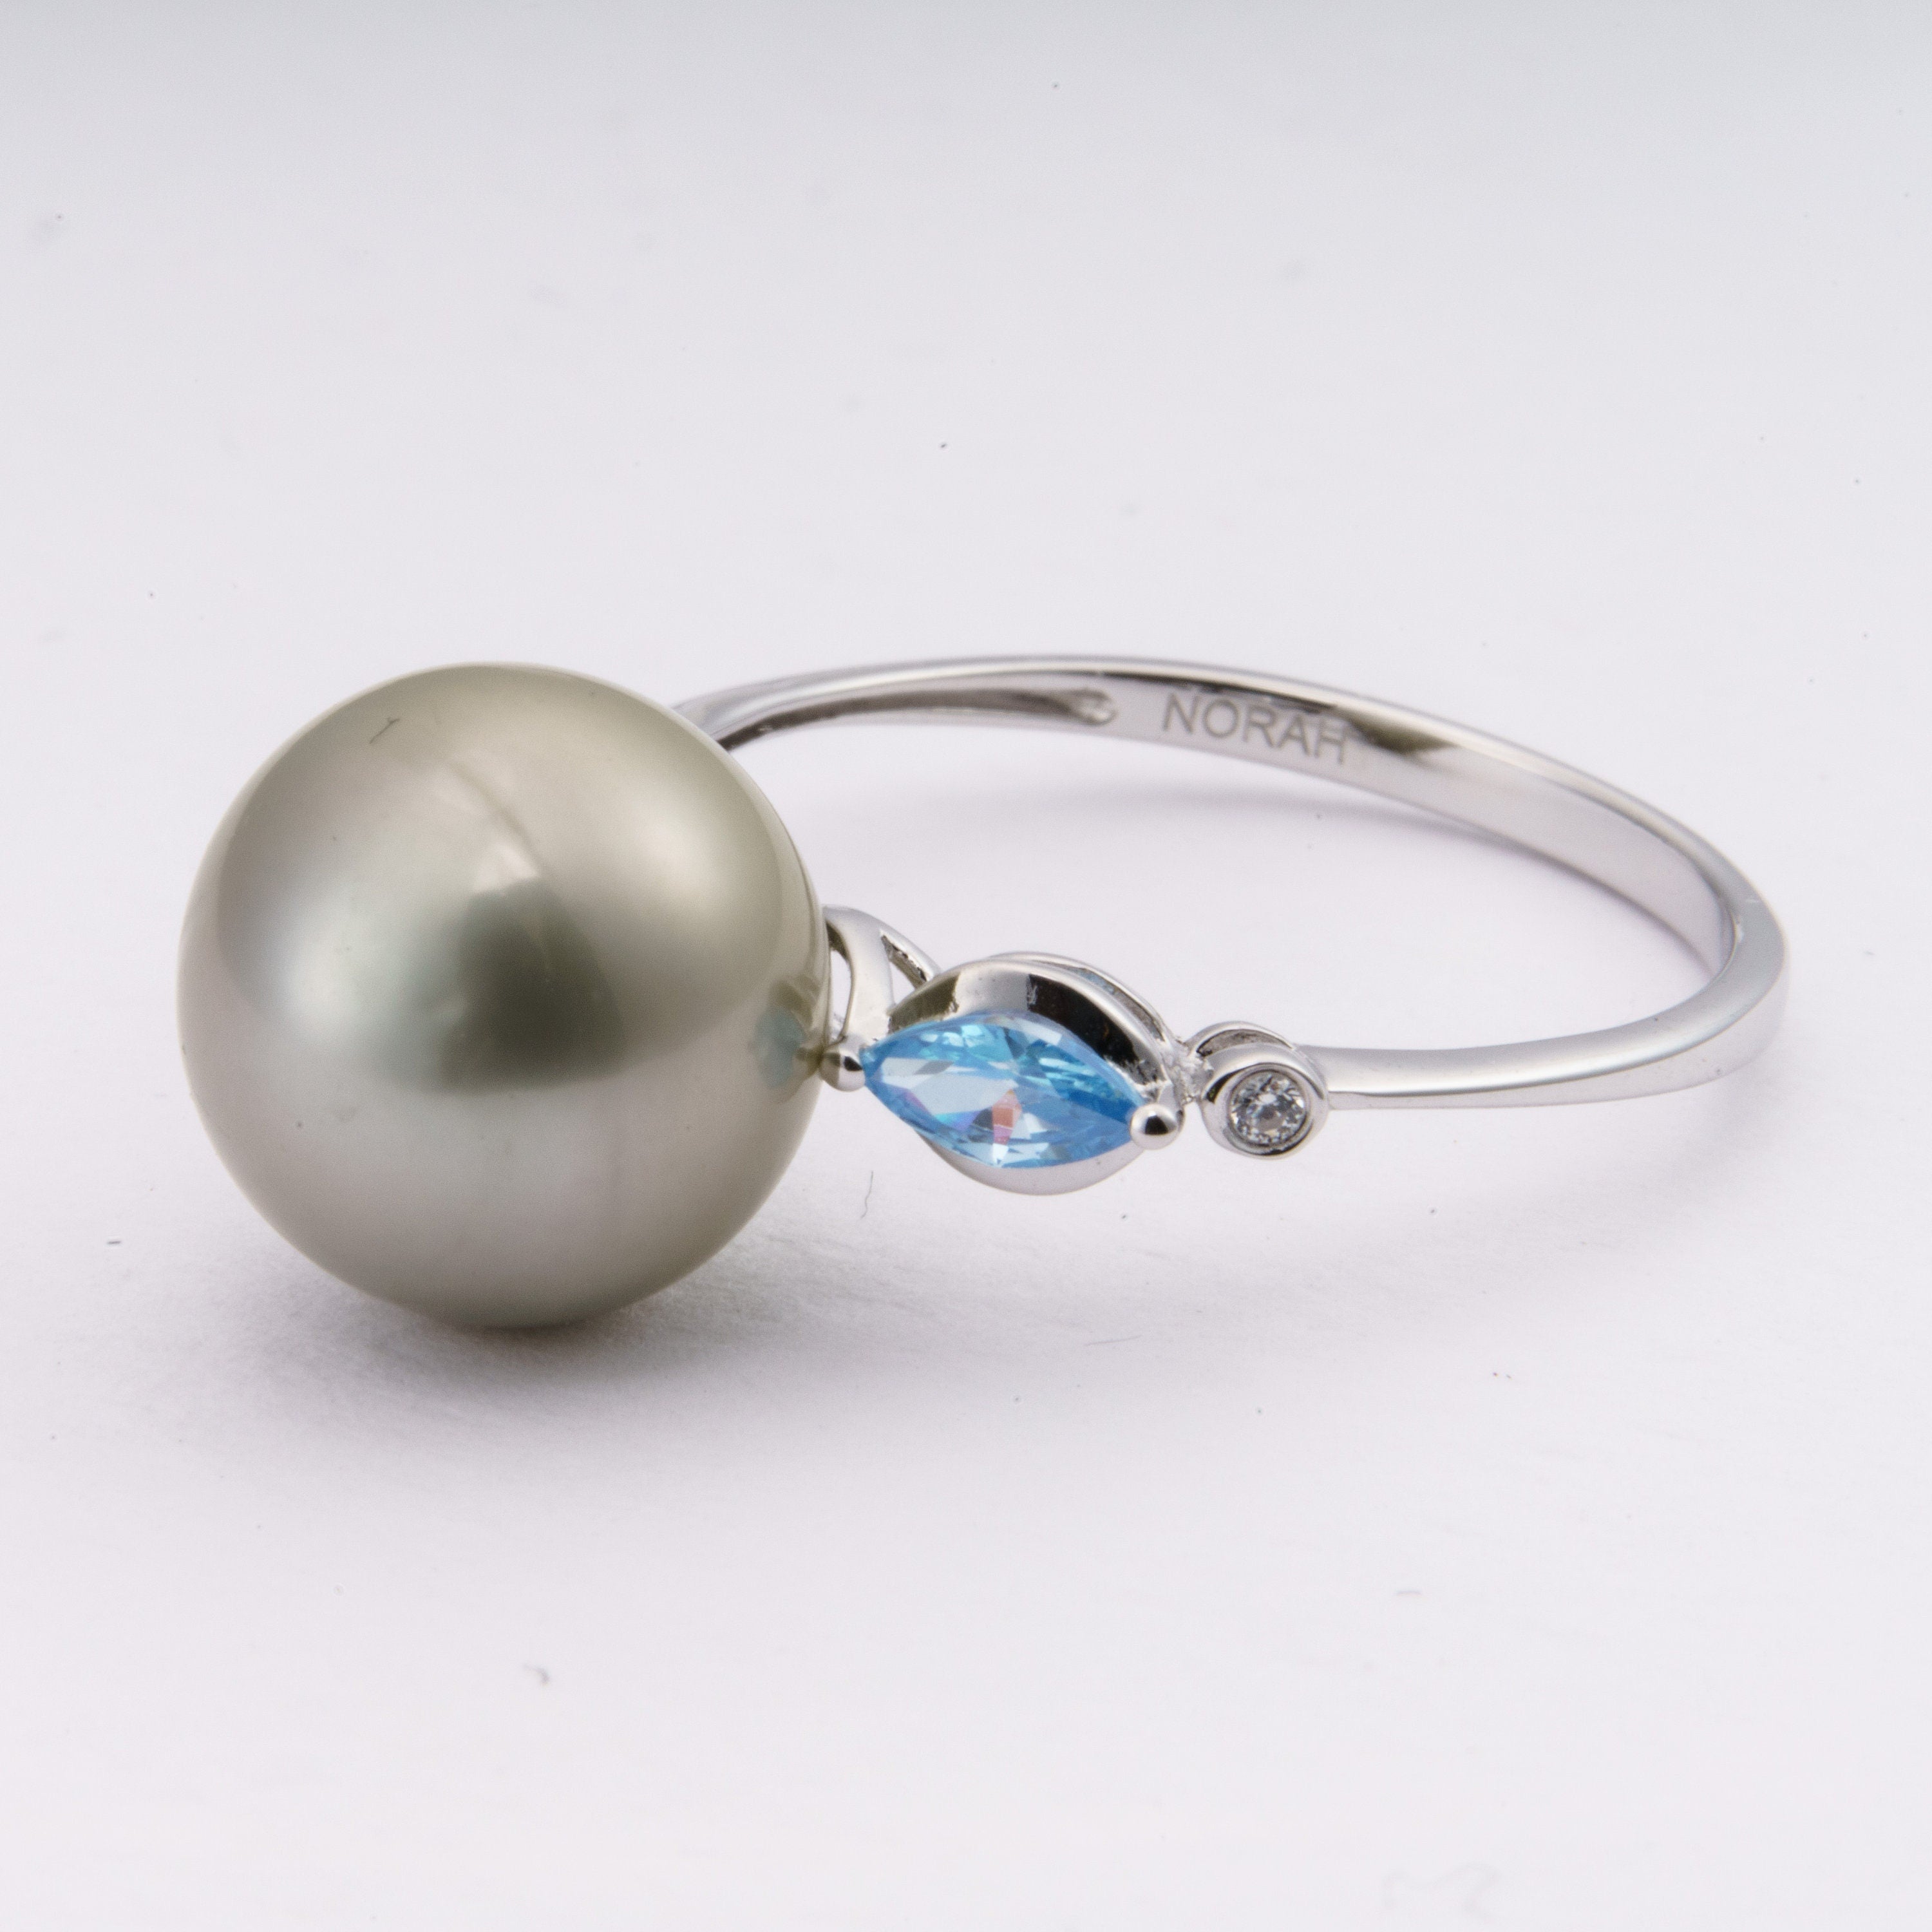 11mm tahitian pearl ring, size 7.5 us, 925 sterling silver with cubic zirconia